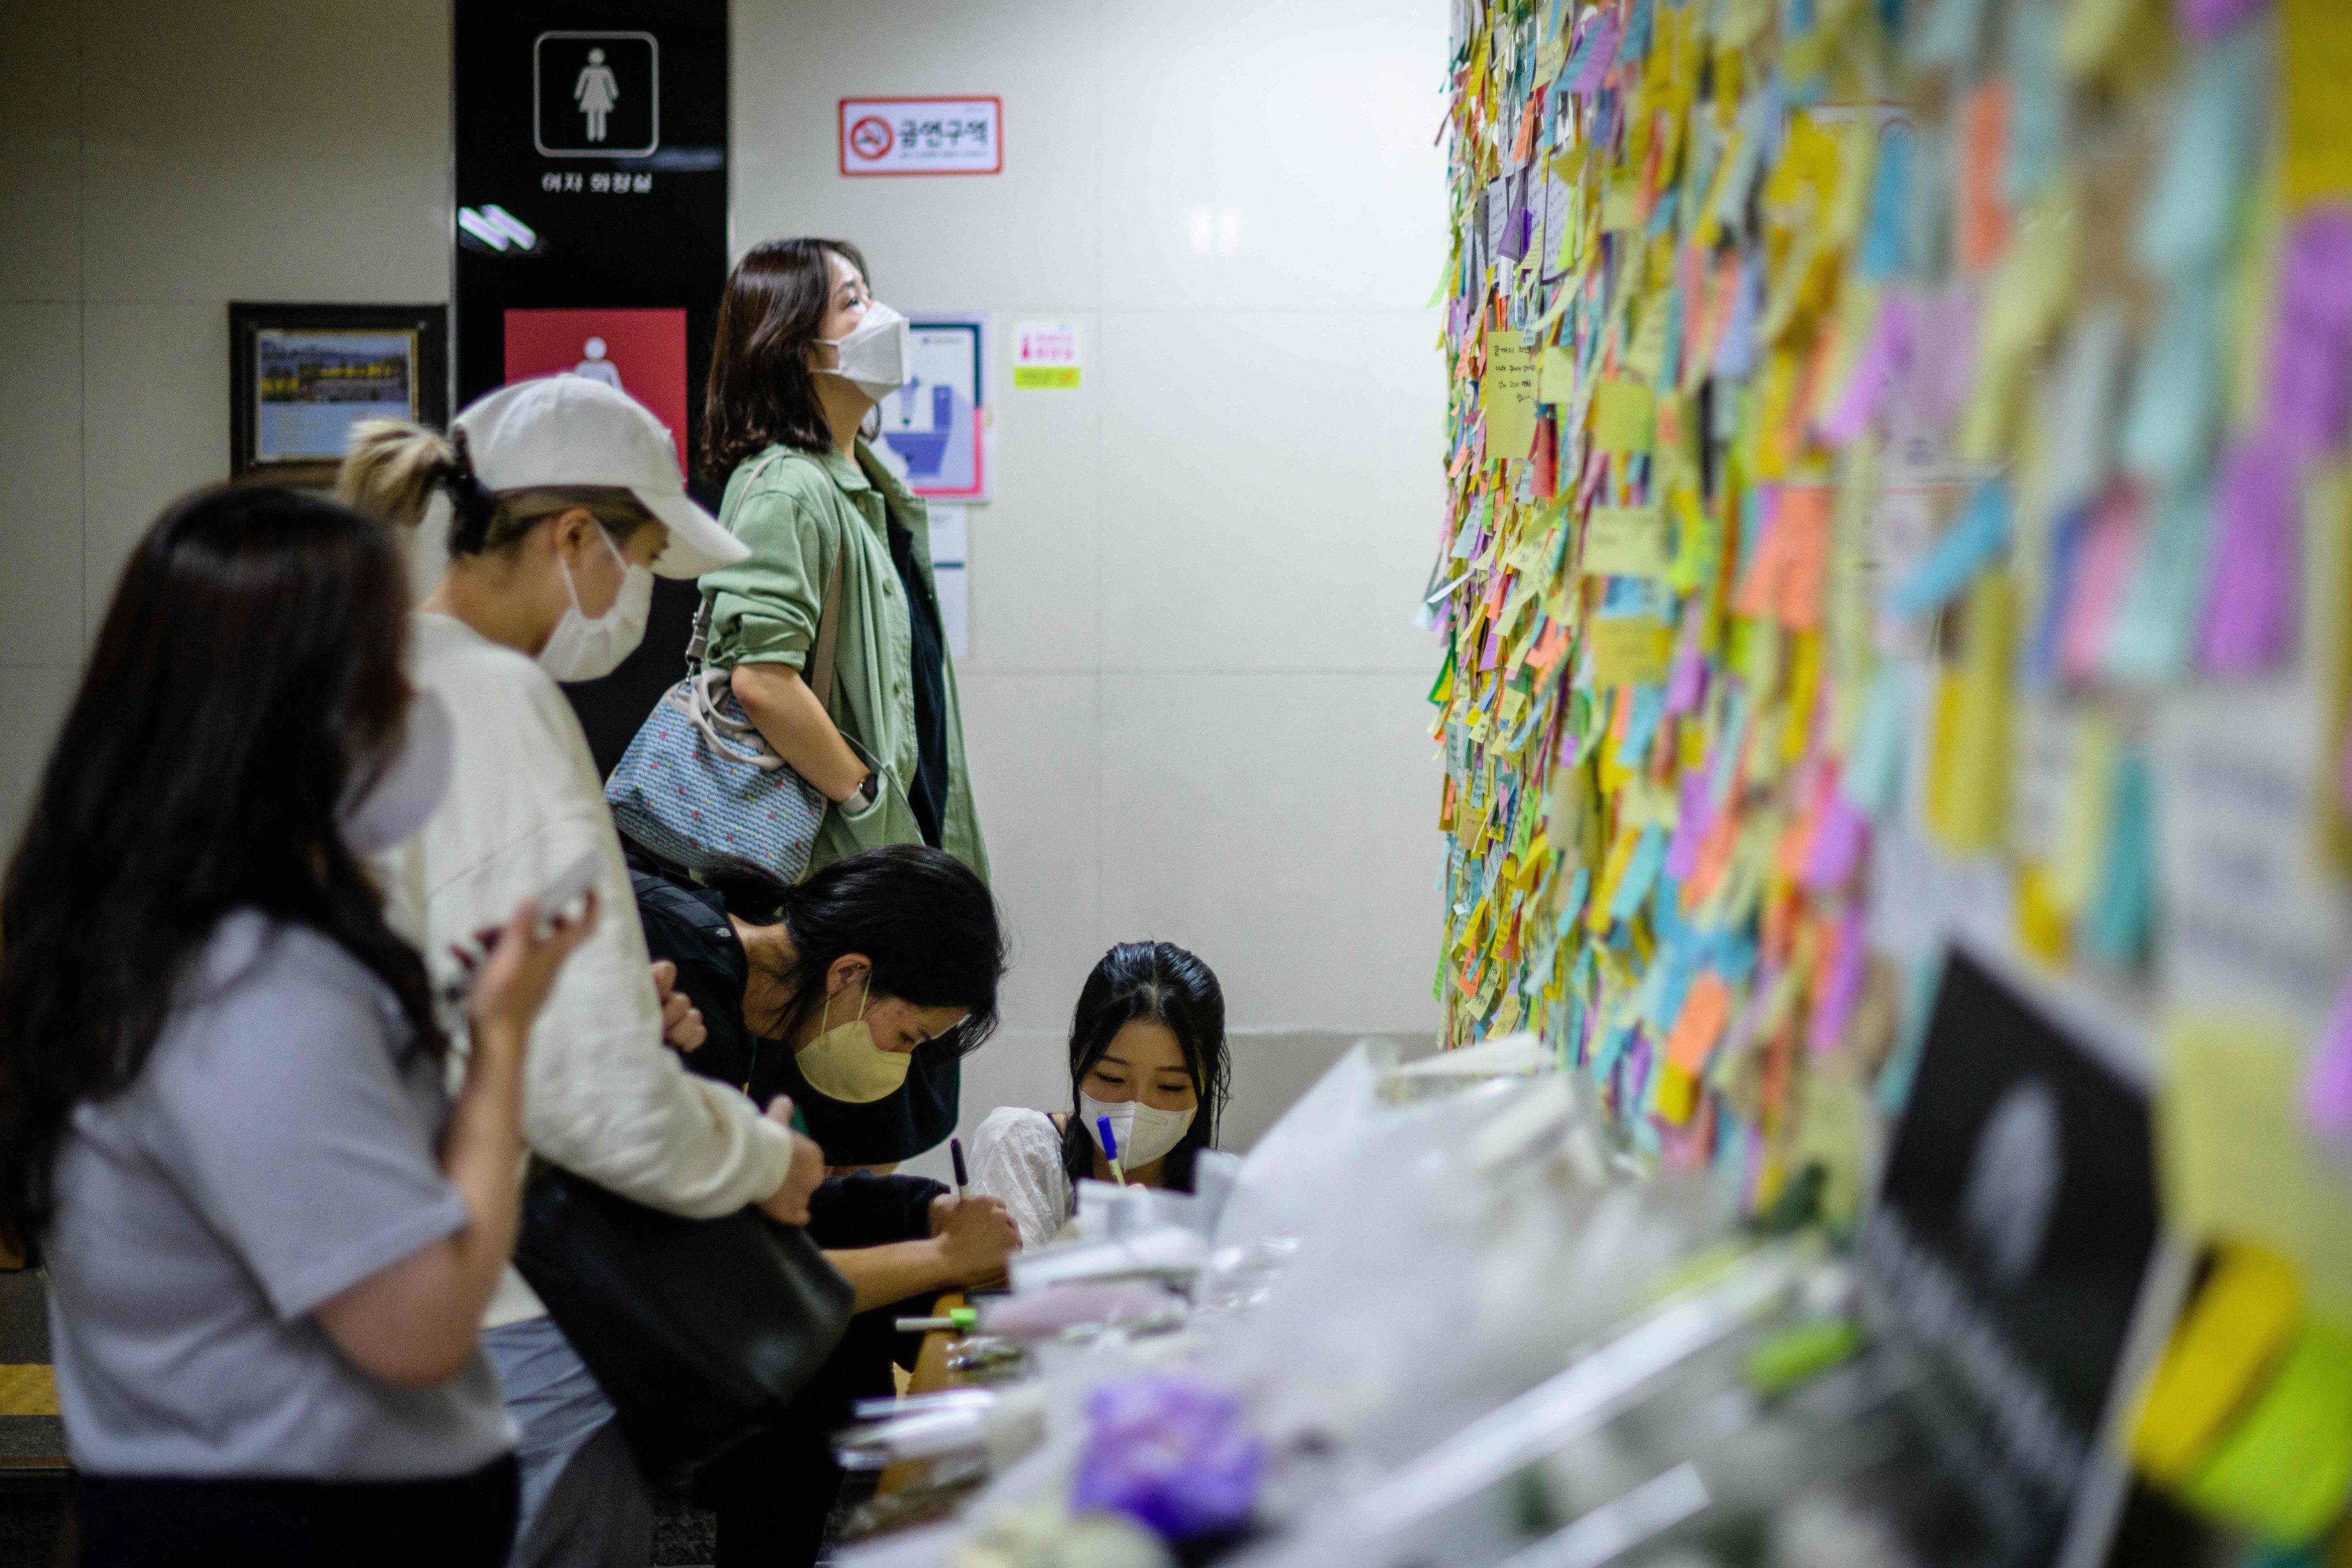 Women mourn the death of a woman killed by her stalker, outside the women’s toilet in Seoul’s Sindang Station, on September 19. Photo: AFP